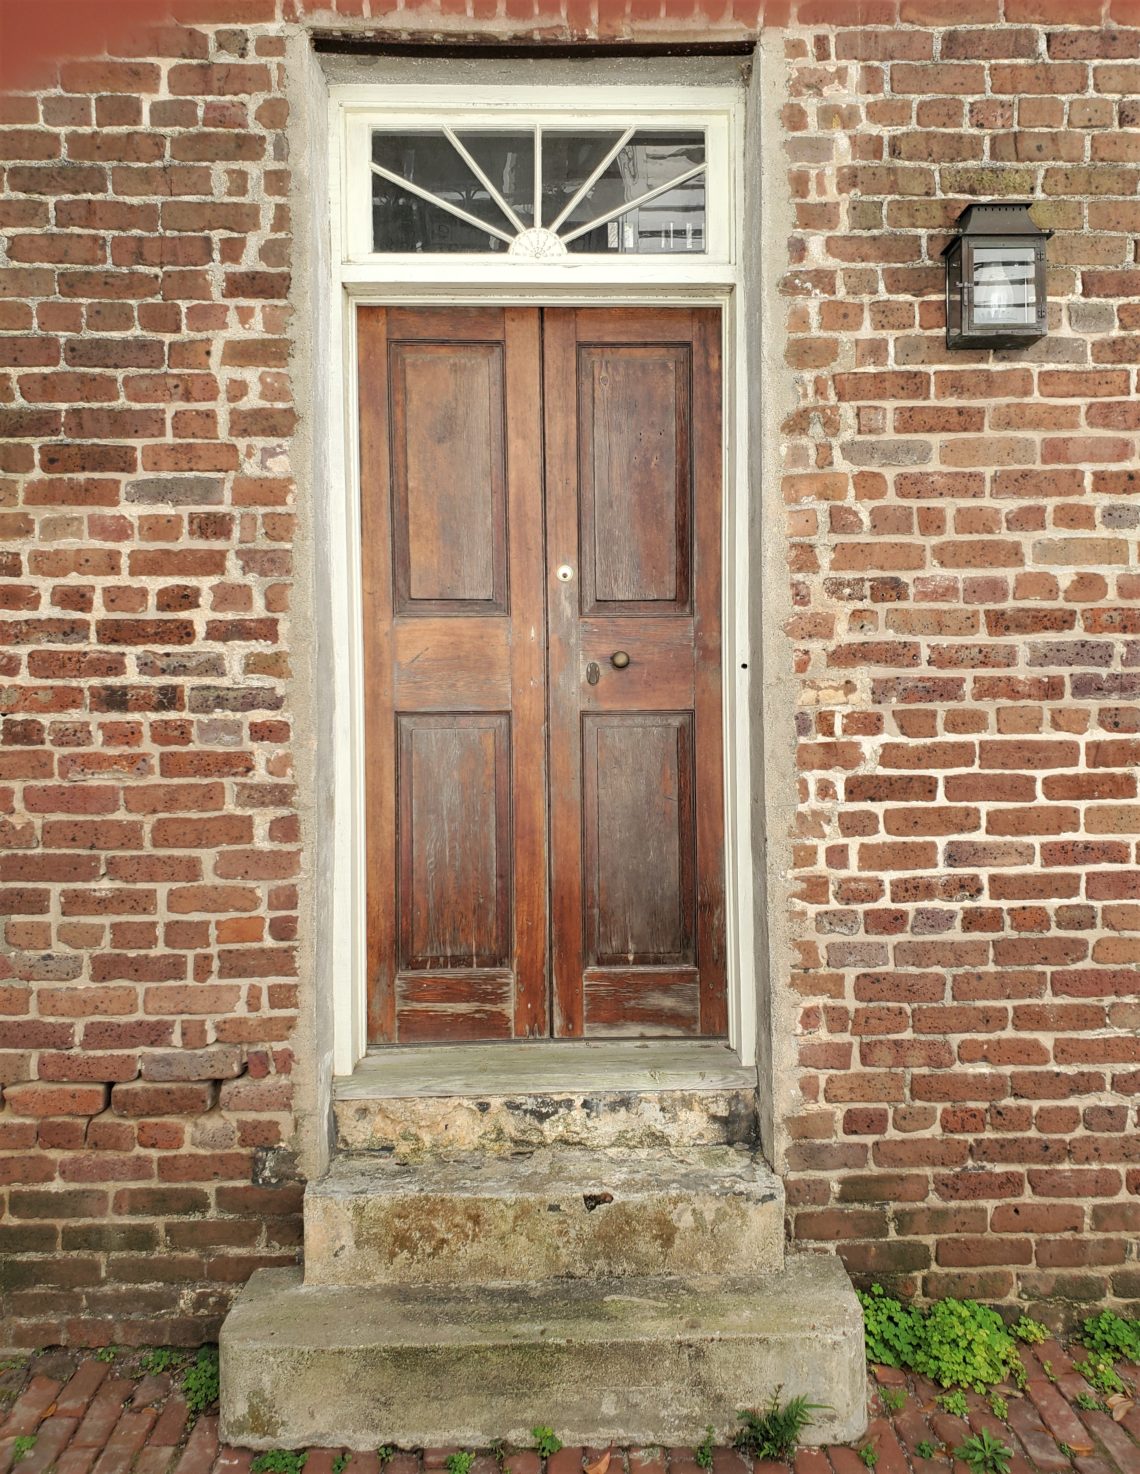 This cool door can be found on Stolls Alley -- which was once referred to as Pilot's Alley, as the ship pilots would cut through there from Church Street to get to the harbor wharves.